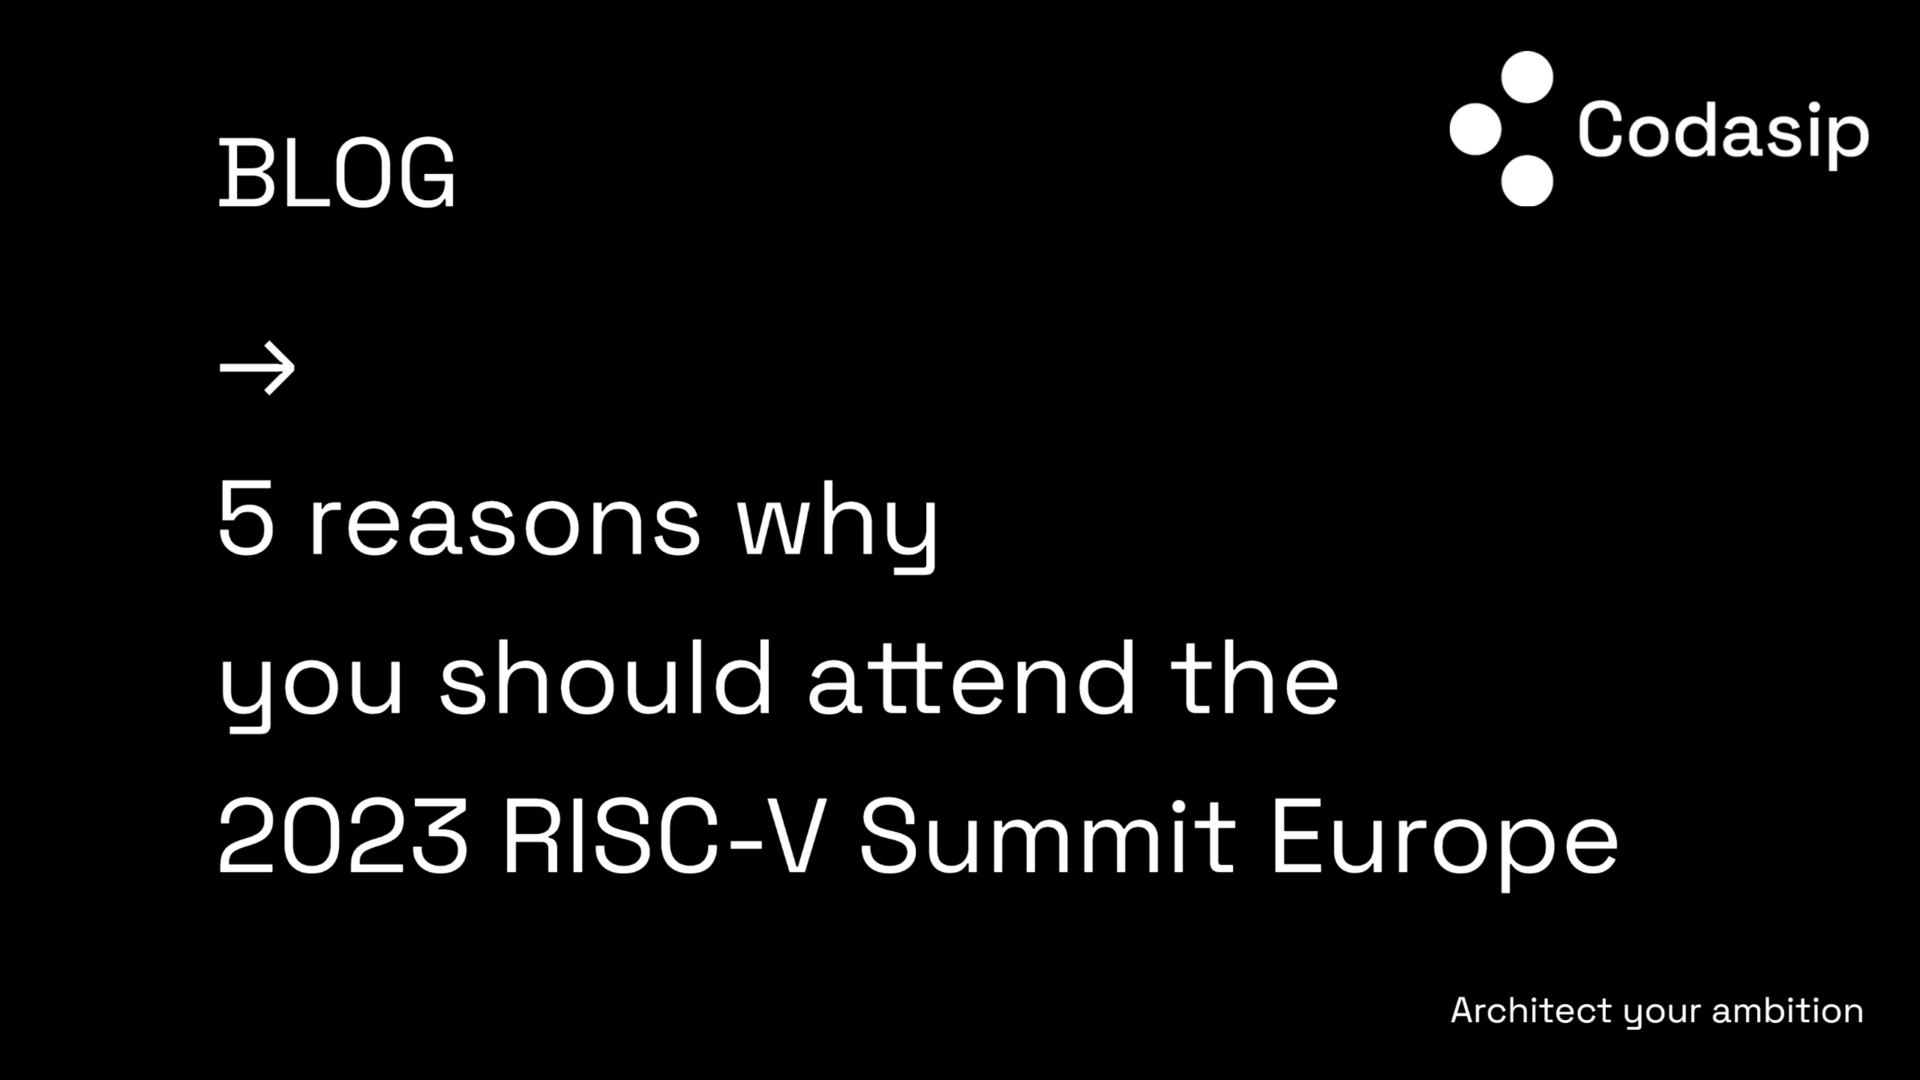 RISC-V Summit Europe Barcelona 2023, blog featured image